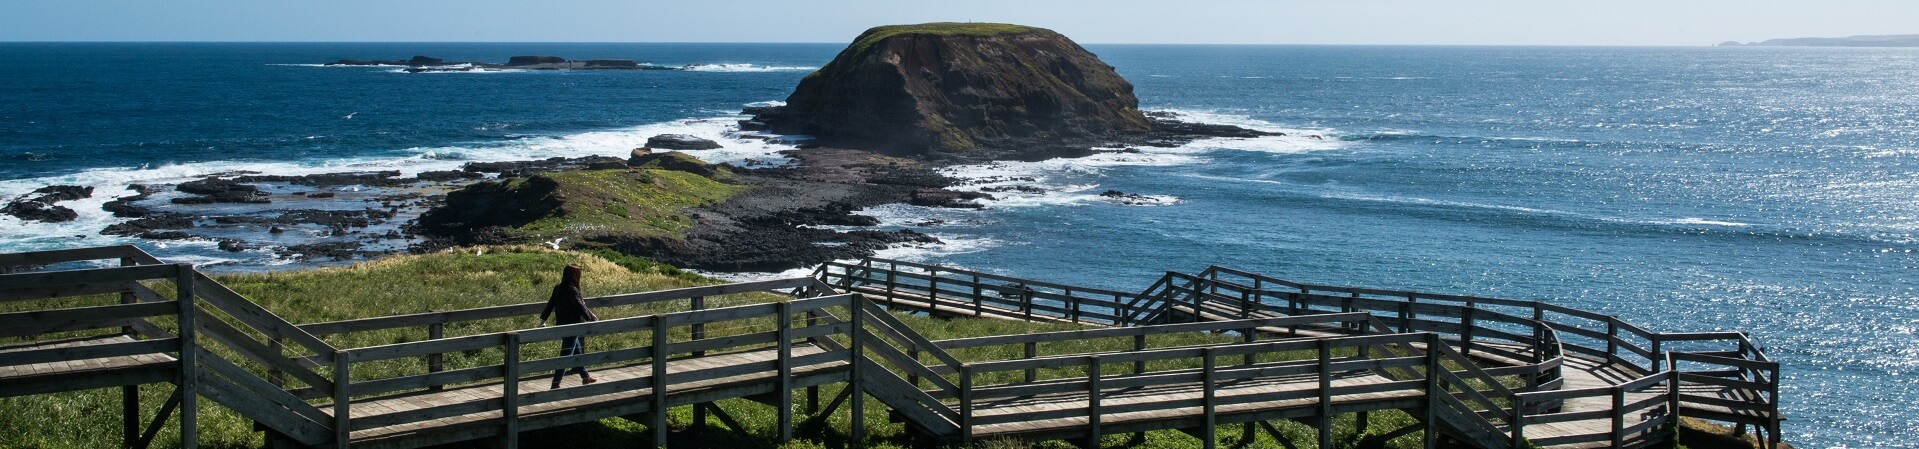 What can you do for free in Phillip Island?